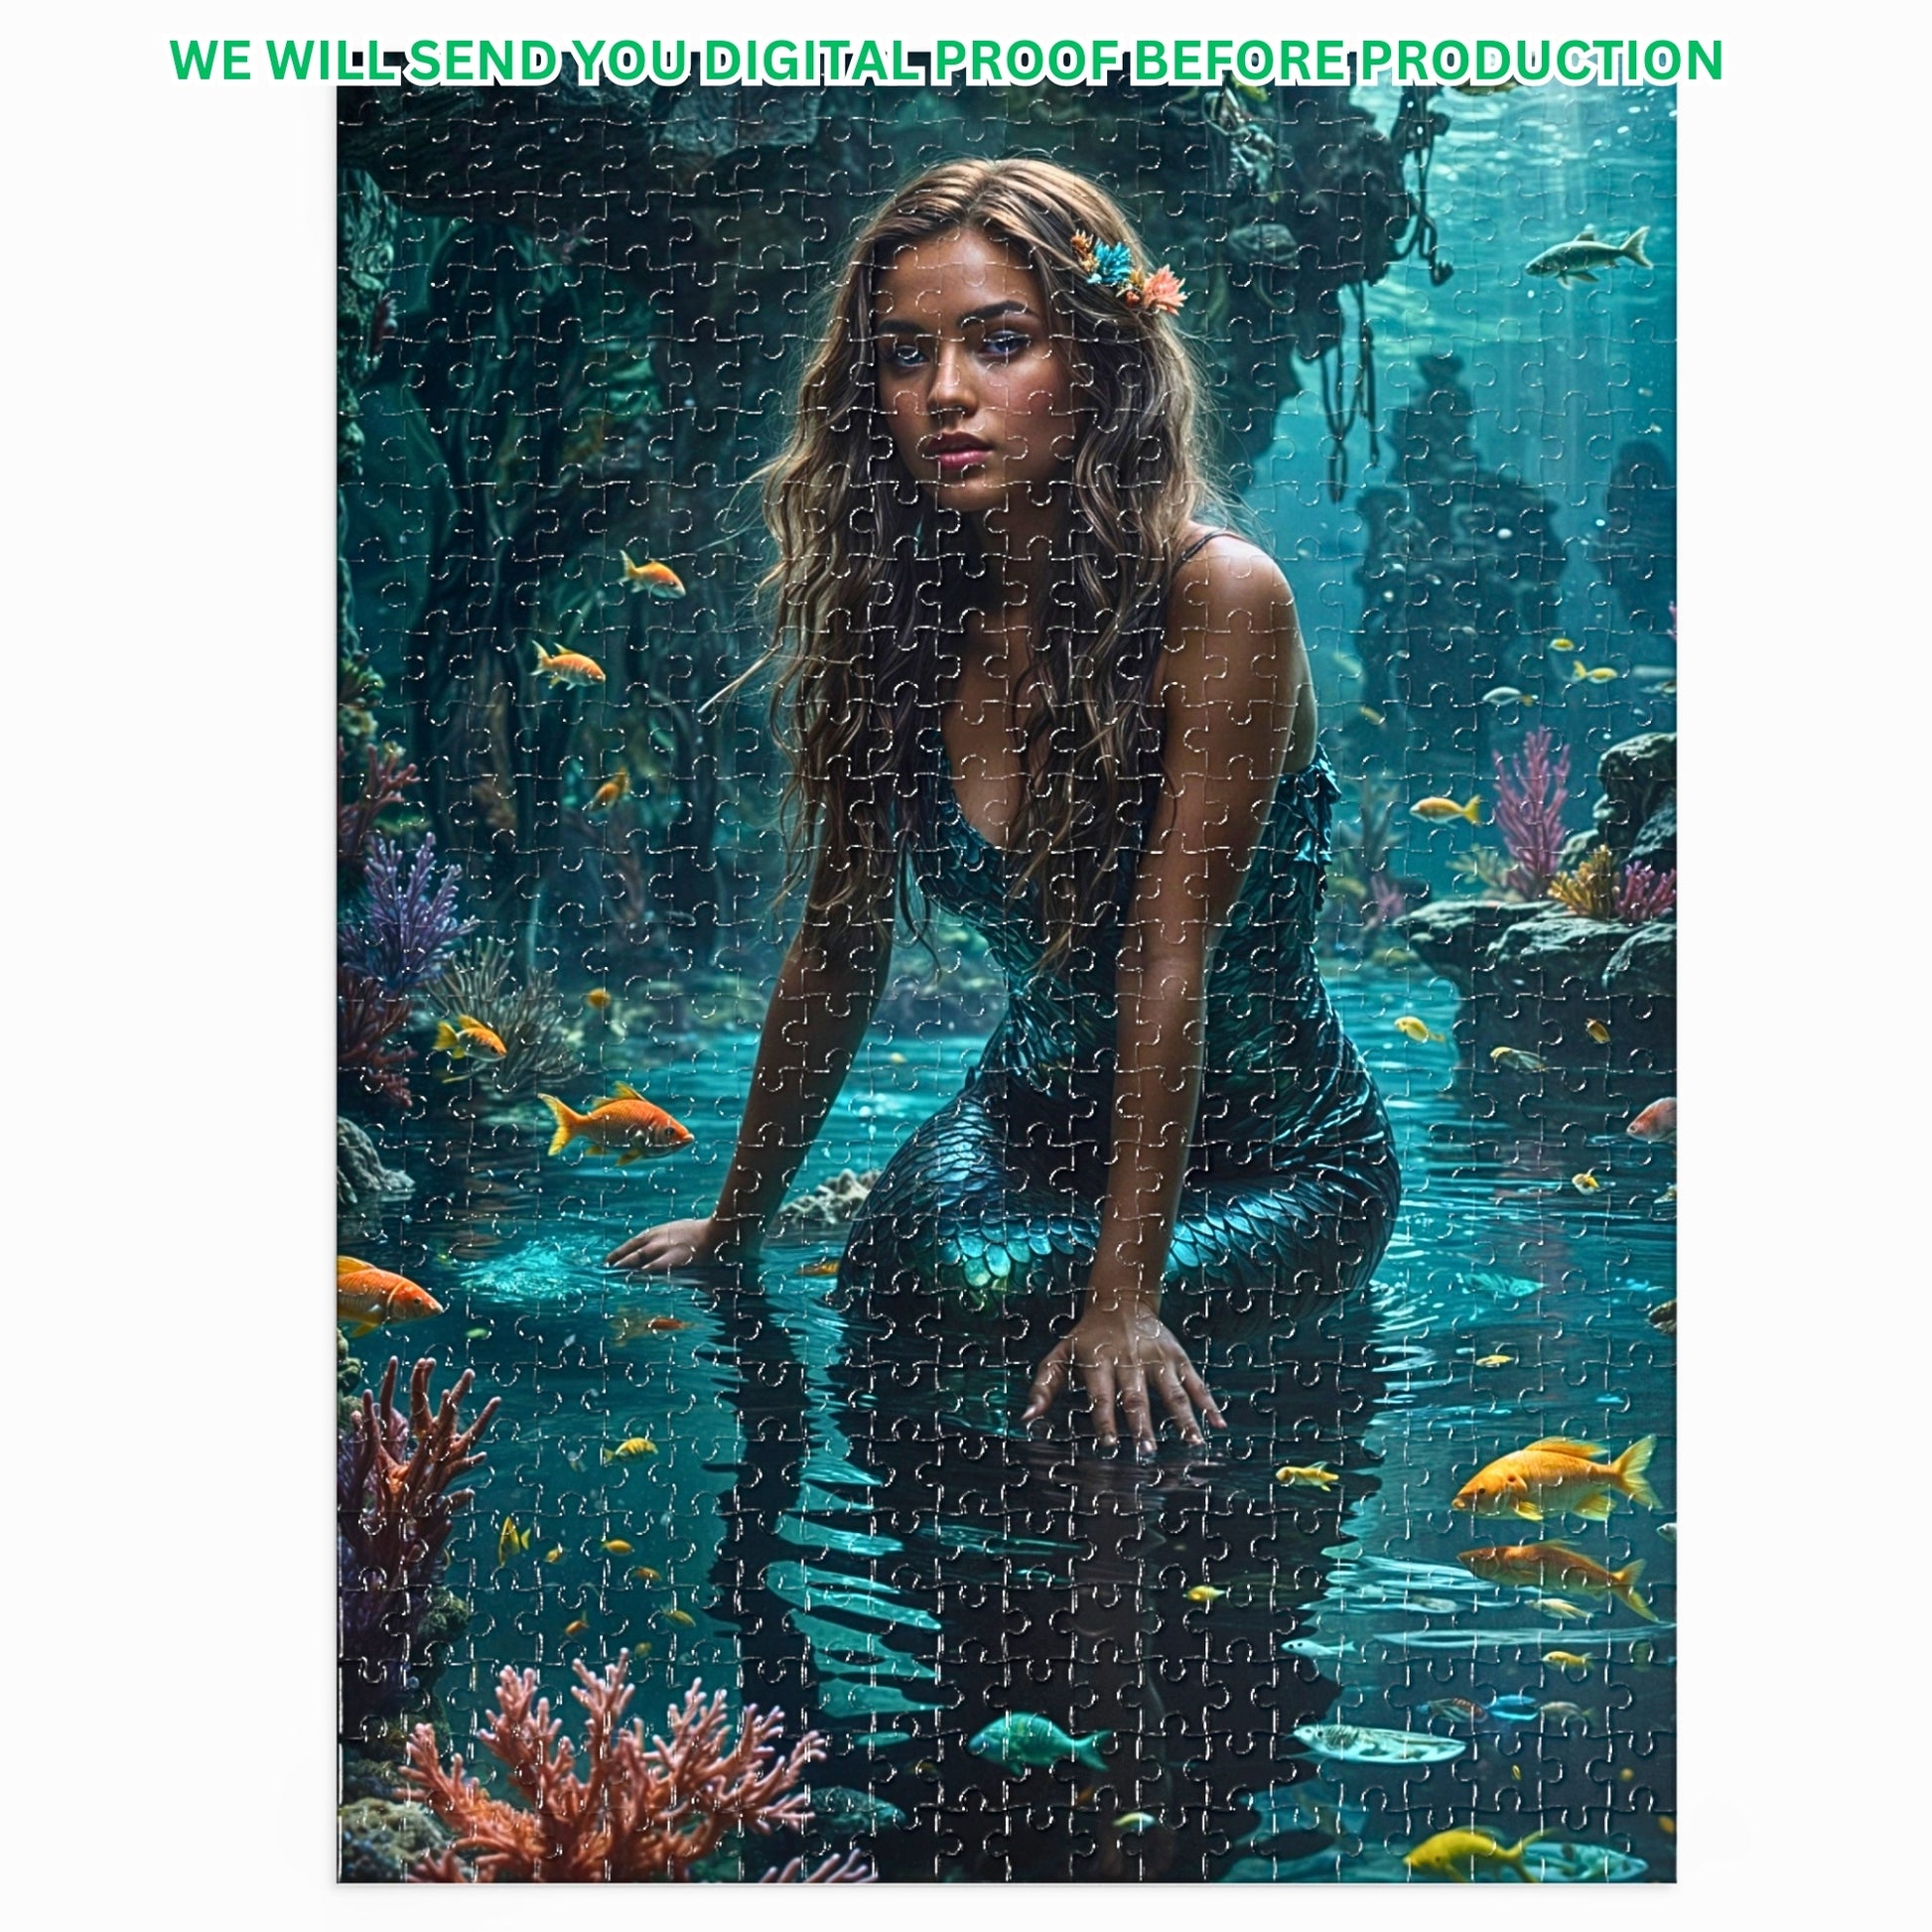 Craft your own mermaid puzzle from a favorite photo! Customize a princess portrait for a special birthday surprise. Choose from 250 to 1000 pieces. Lady mermaid gifts, princess gifts, and mermaid photo gifts are options. Turn any image into a unique mermaid art puzzle. Perfect for mermaid and princess enthusiasts. Order your personalized puzzle creation today!